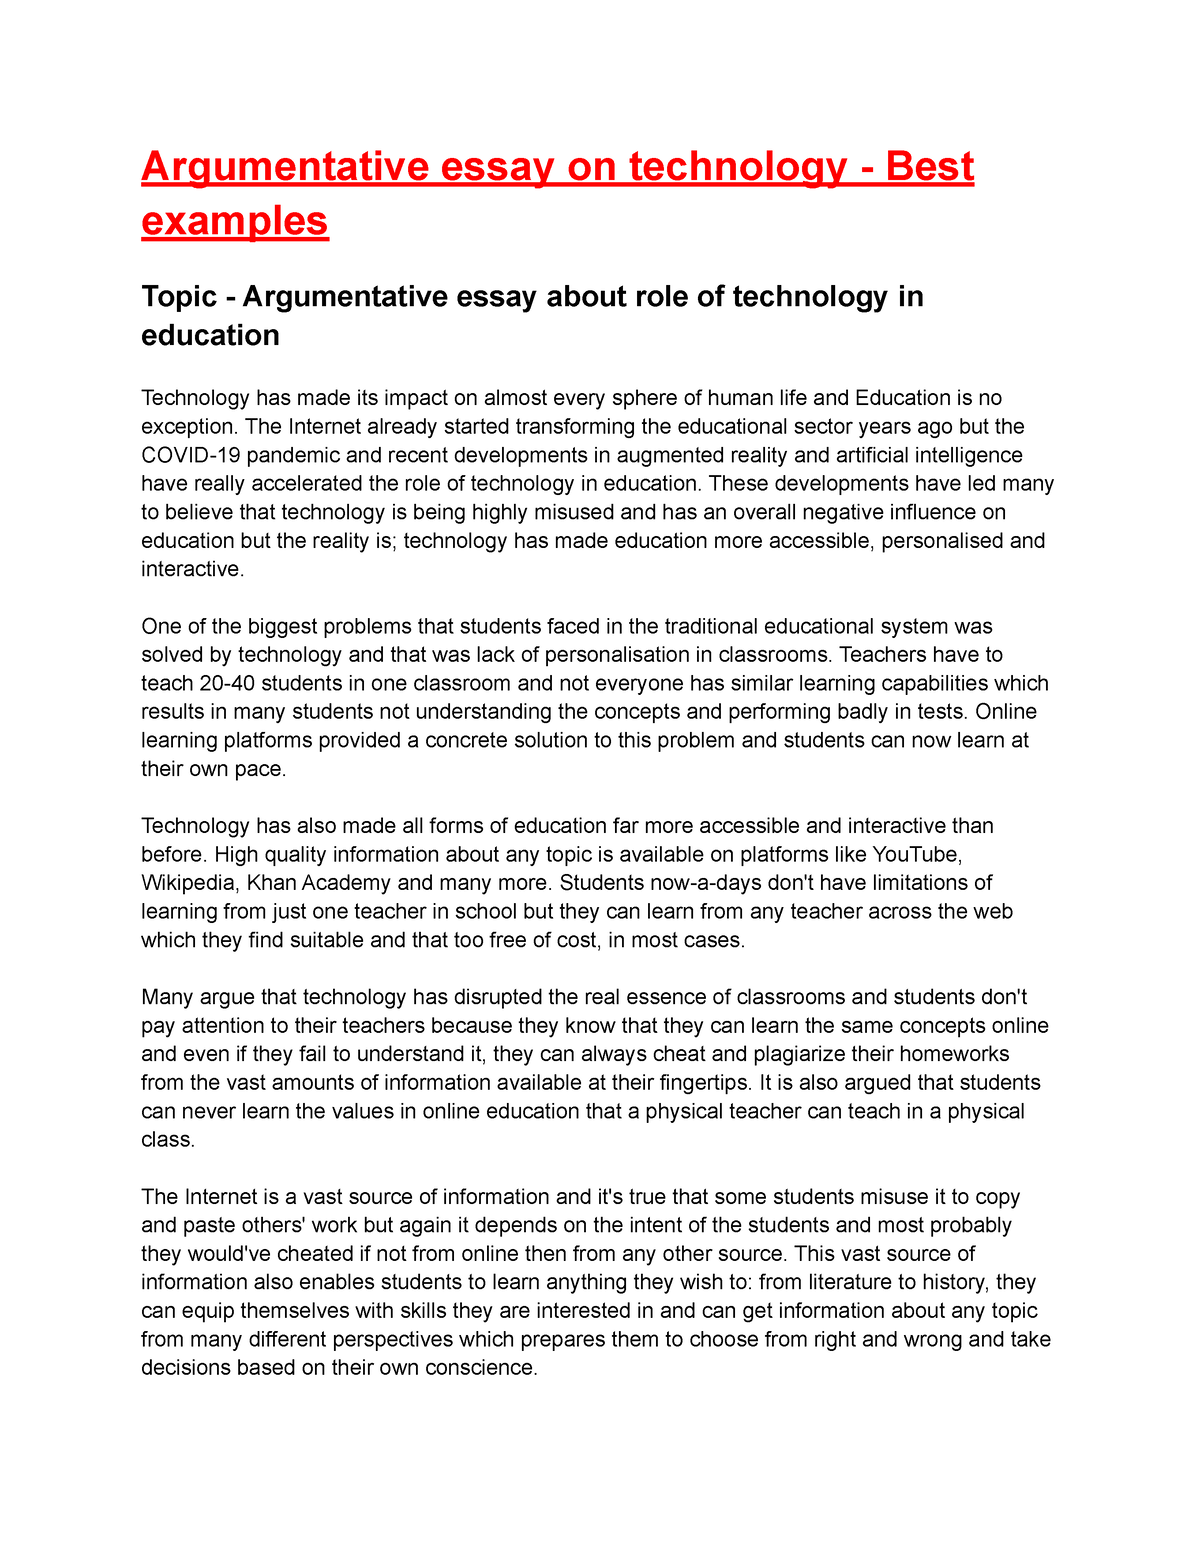 simple essay for technology